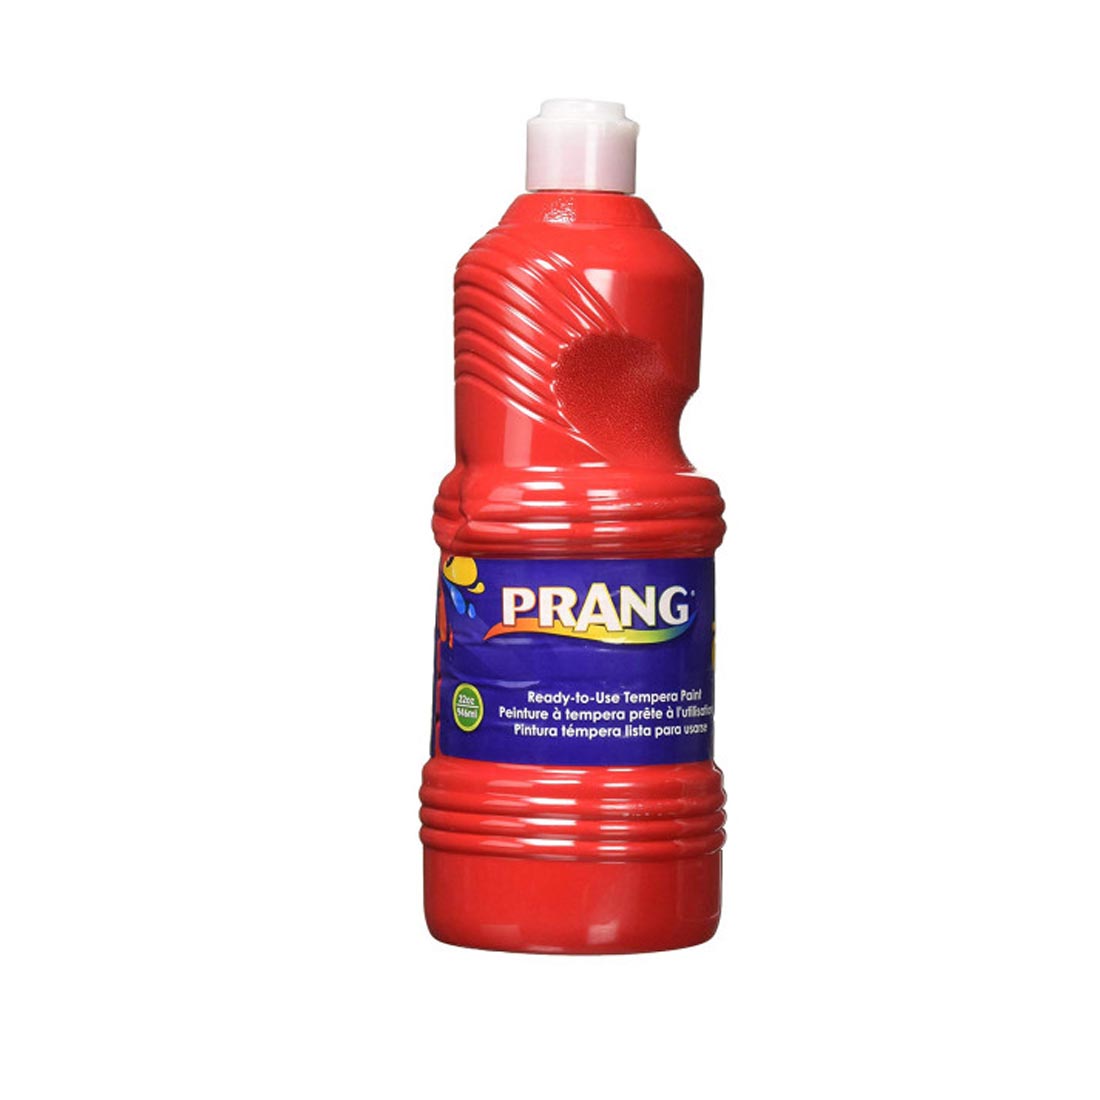 Red Prang Ready-To-Use Tempera Paint